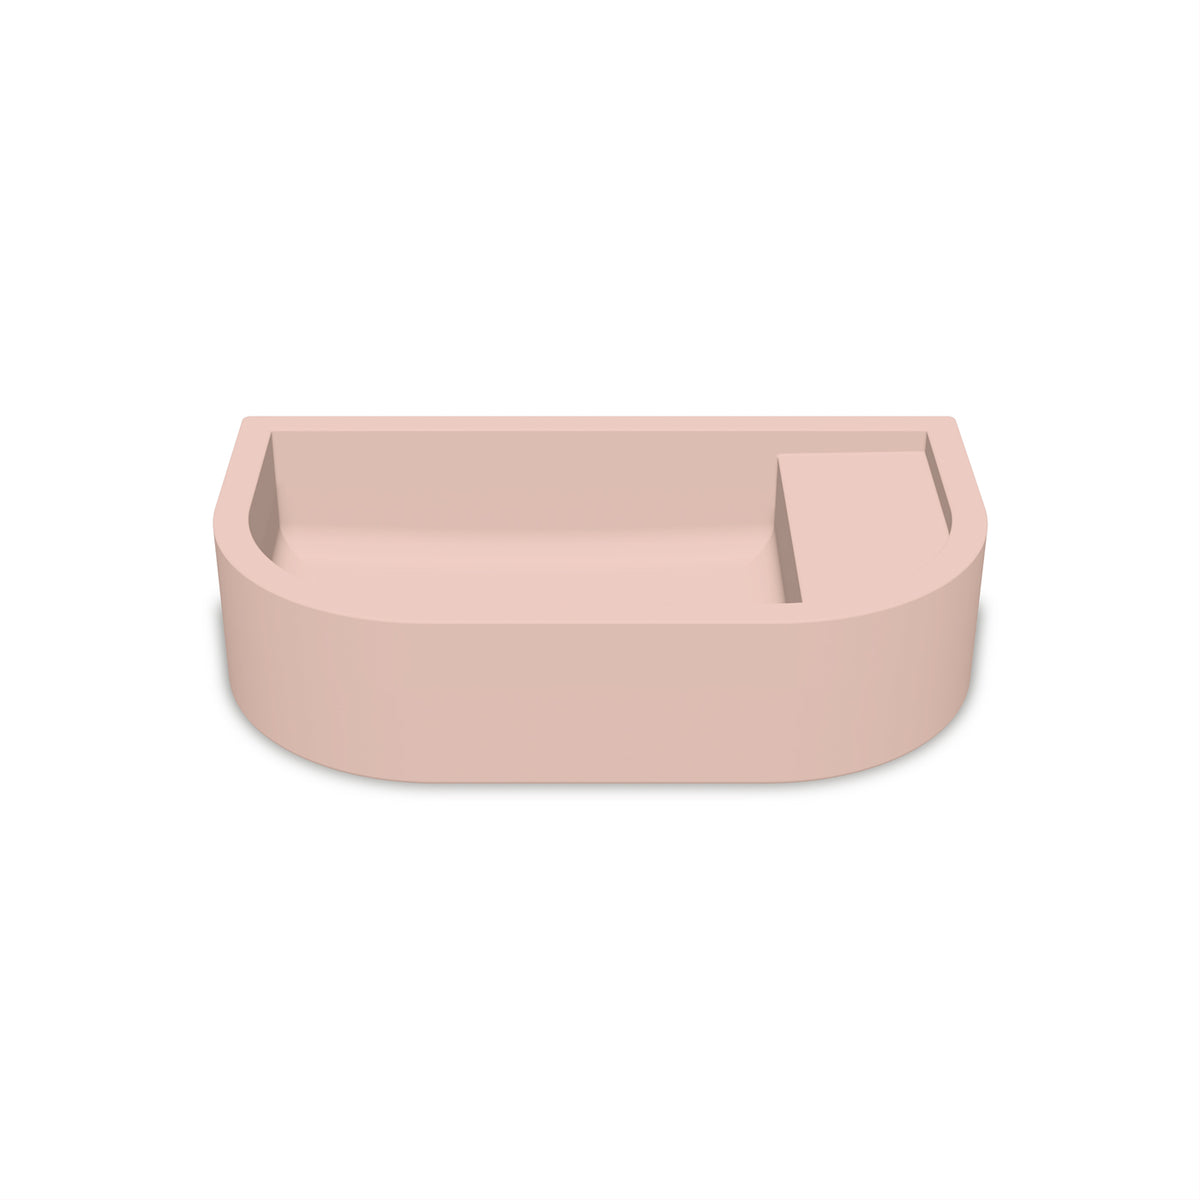 Loop 02 Basin - Overflow - Surface Mount (Blush Pink,No Tap Hole,Brass)